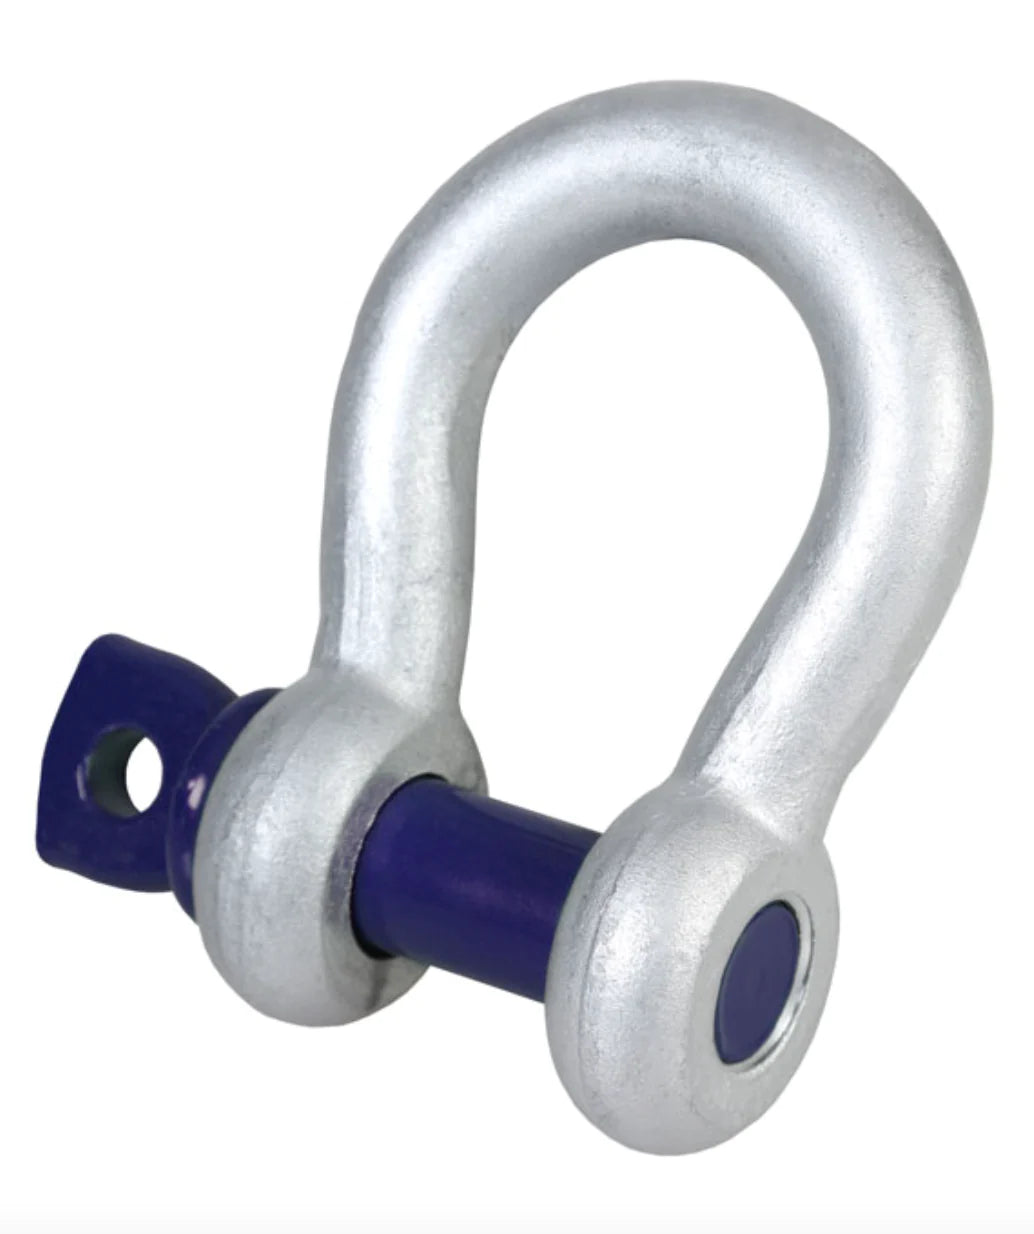 GT Blue Pin Bow Shackle with Screw Collar Pin – BPSCB